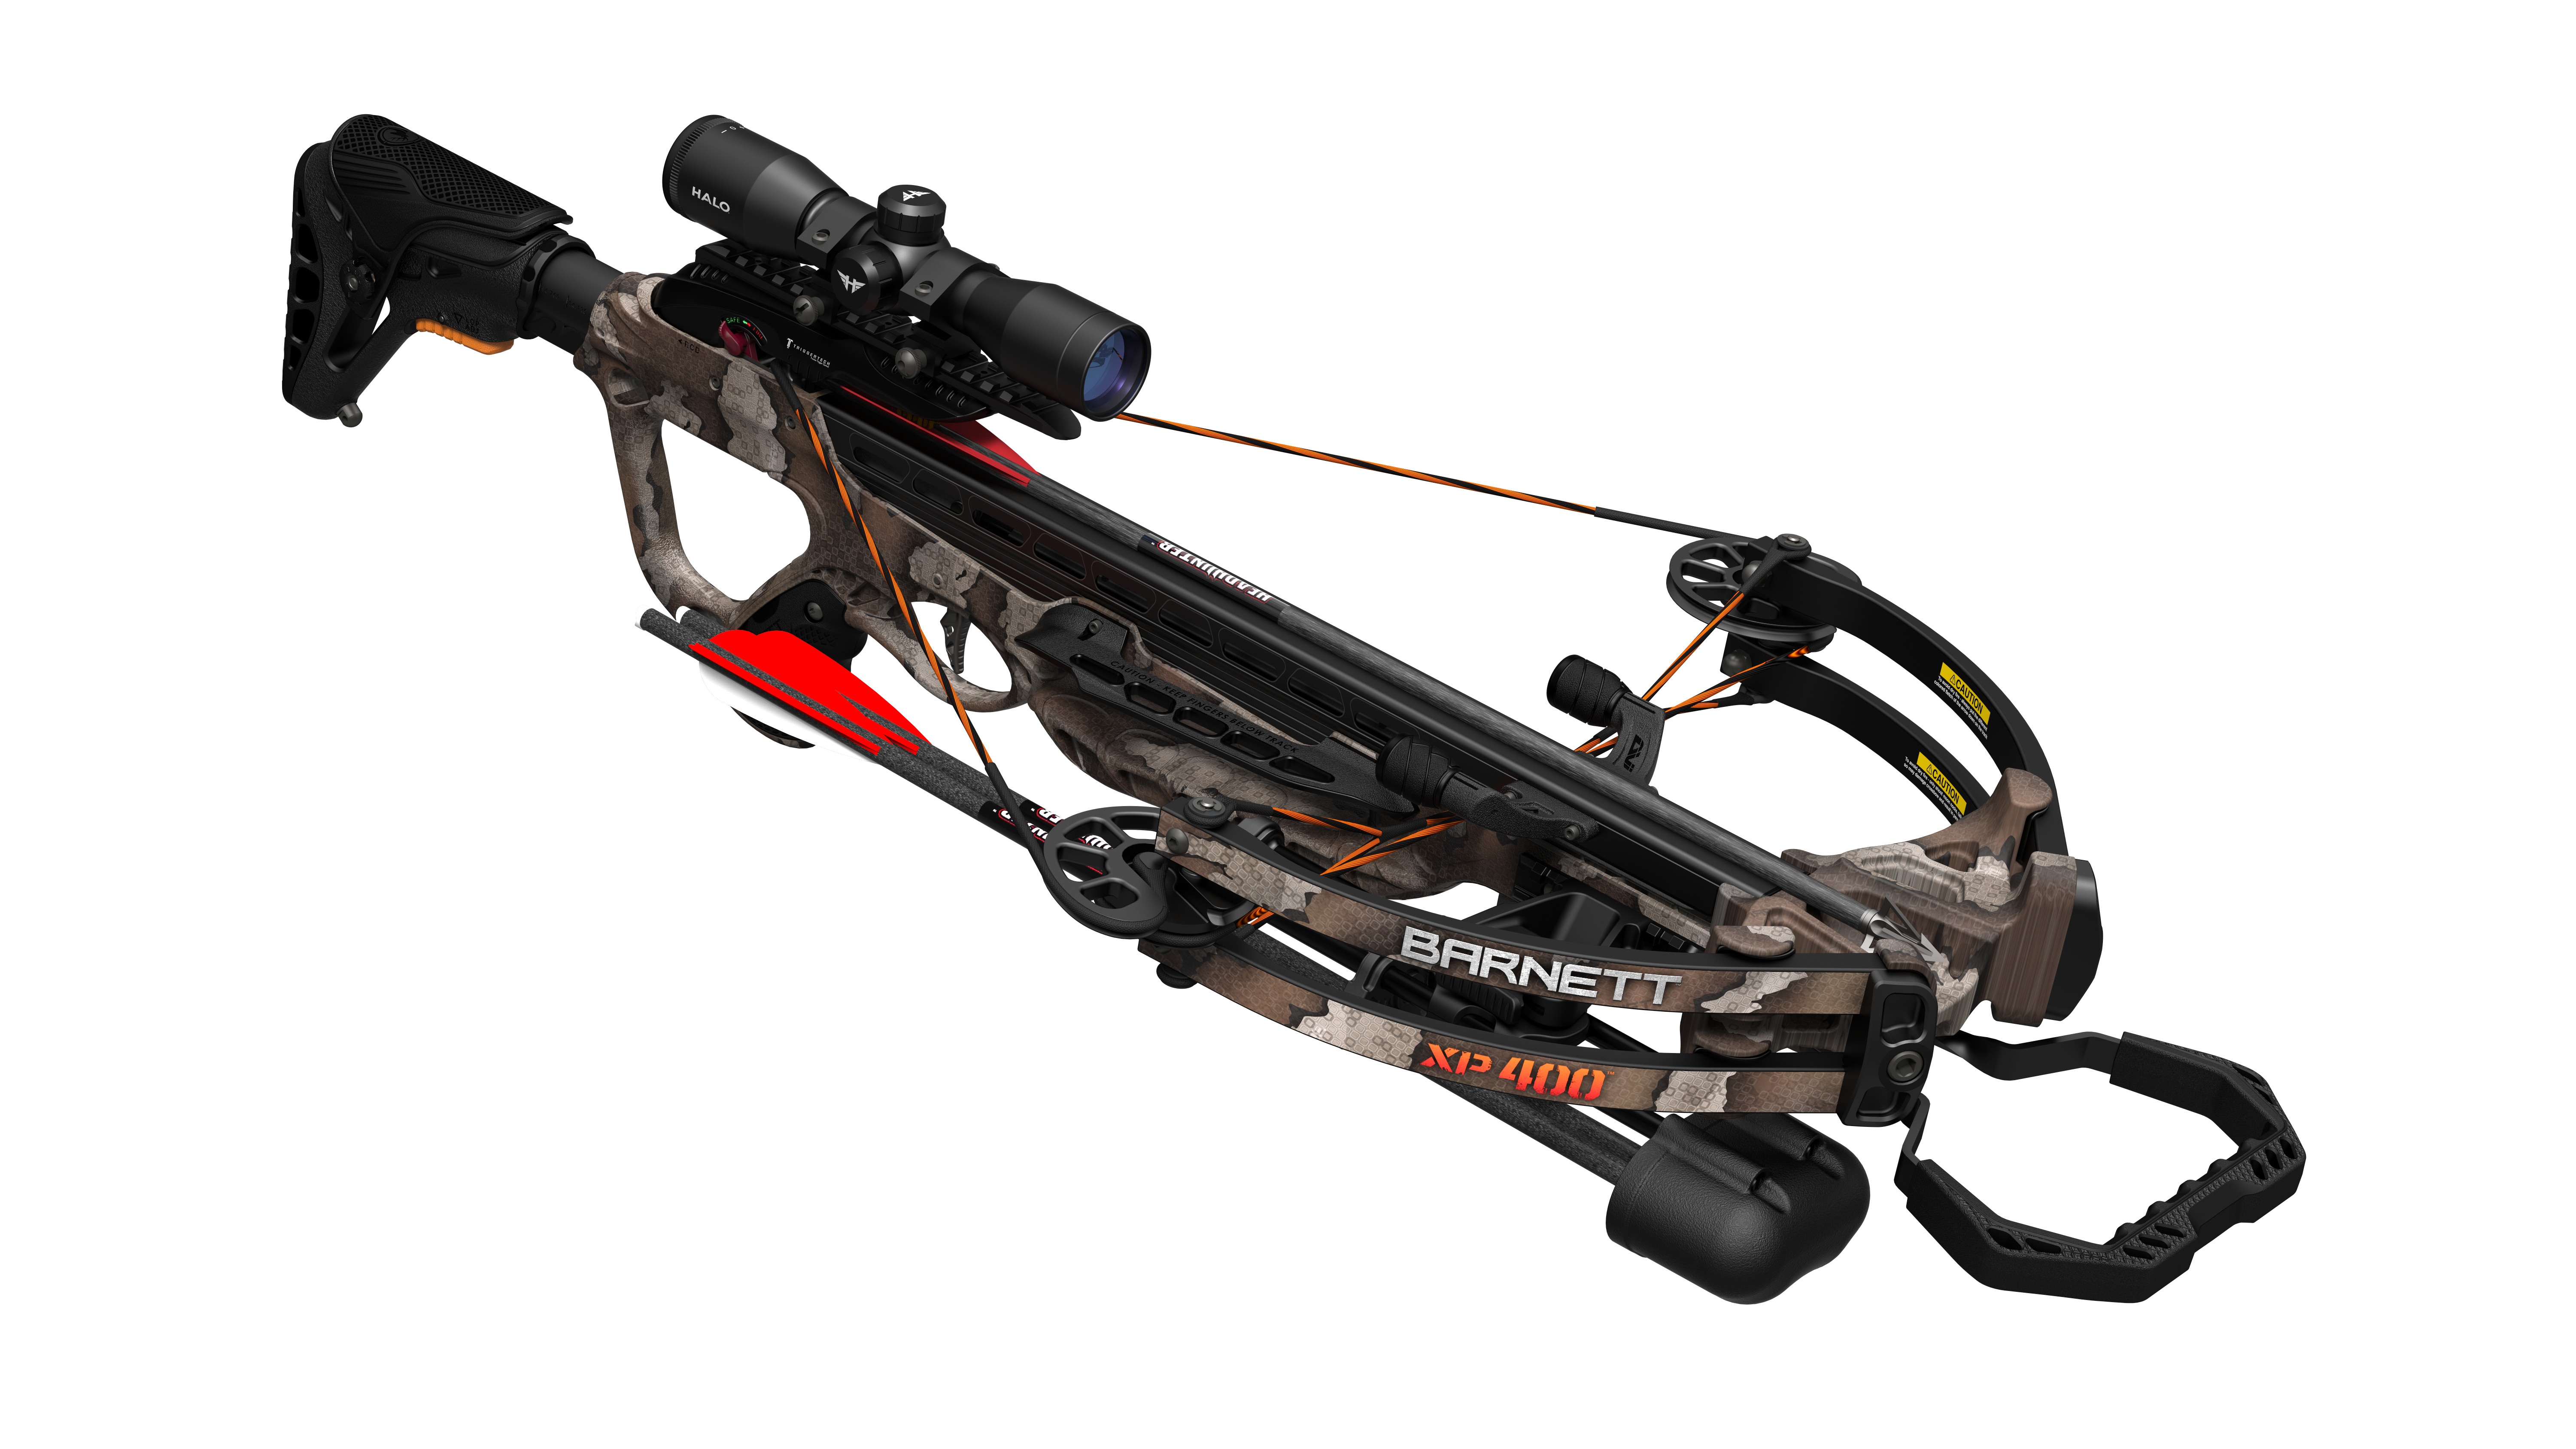 BAR XP400 XBOW Barnett Expedition 400 Crossbow, Crank Cocking Device Included, 400 FPS - image 2 of 9